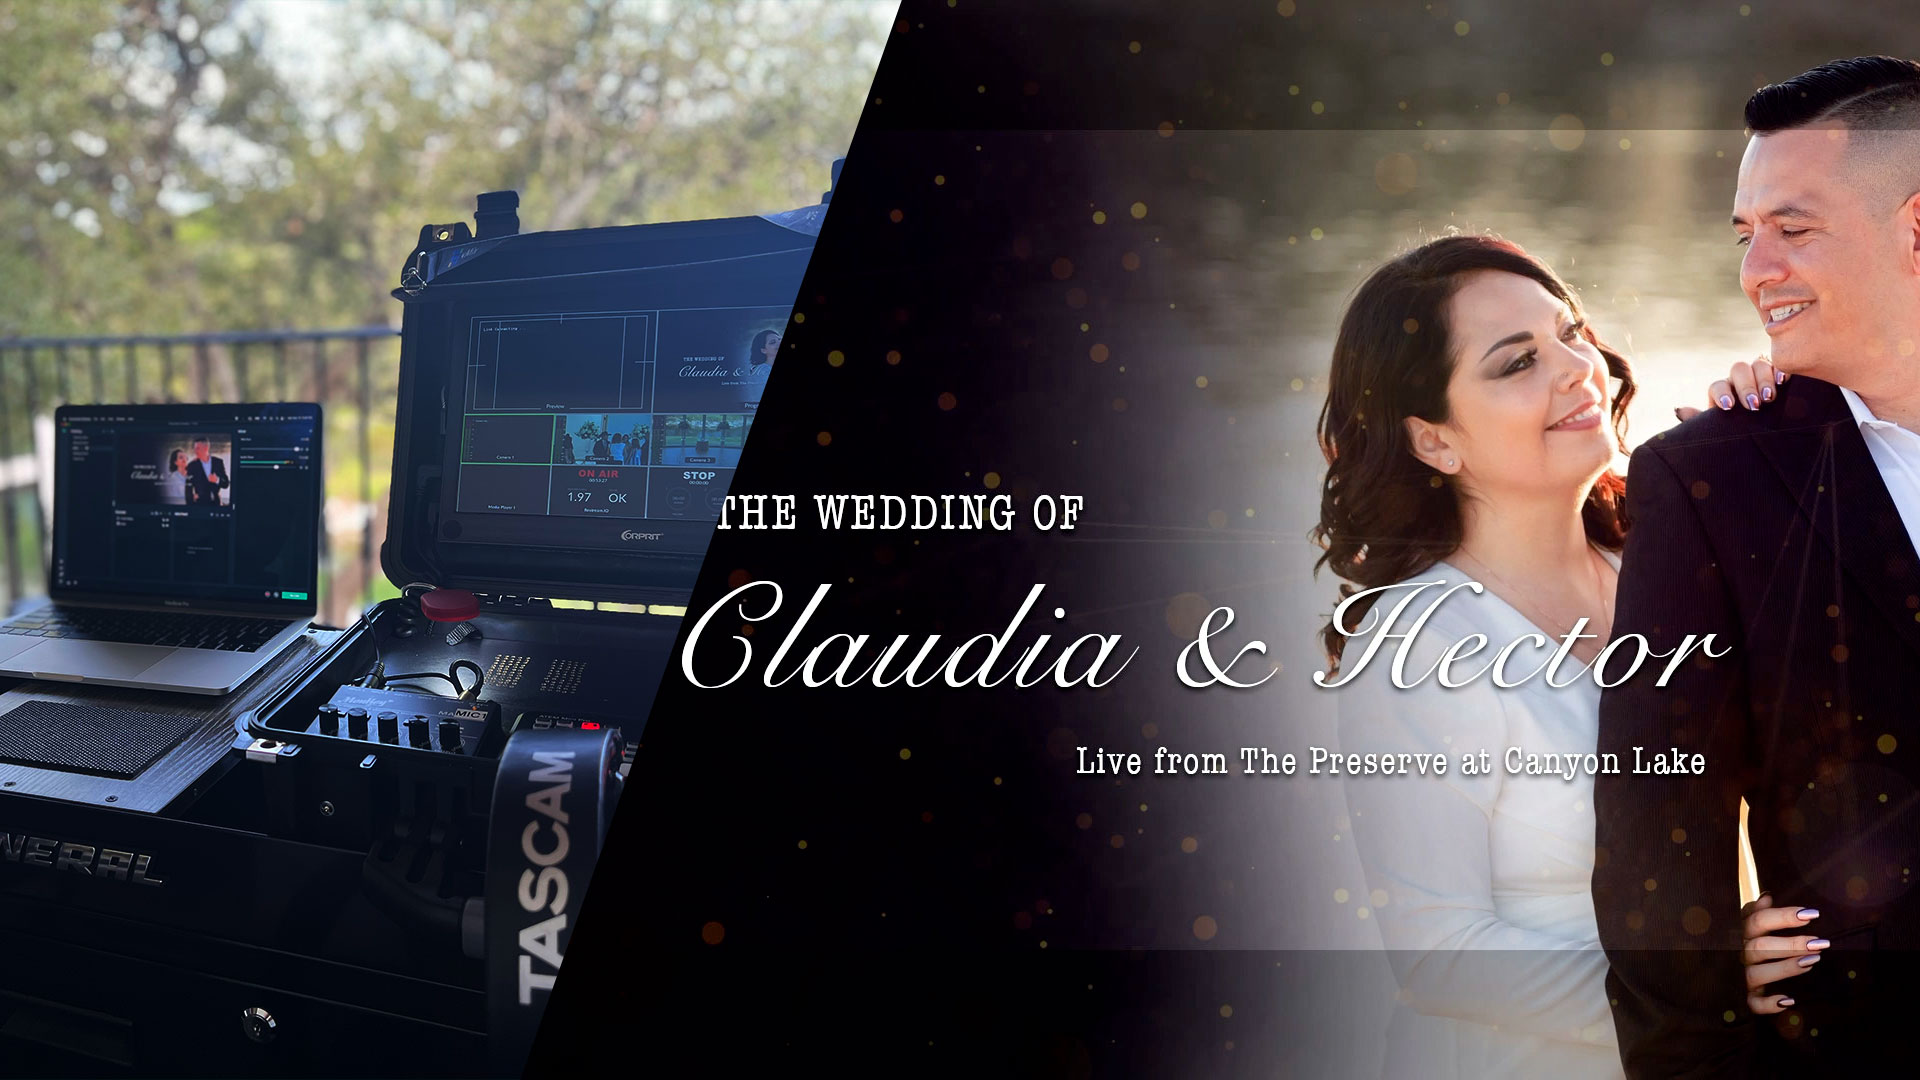 Claudia & Hector – Wedding Live-Streaming